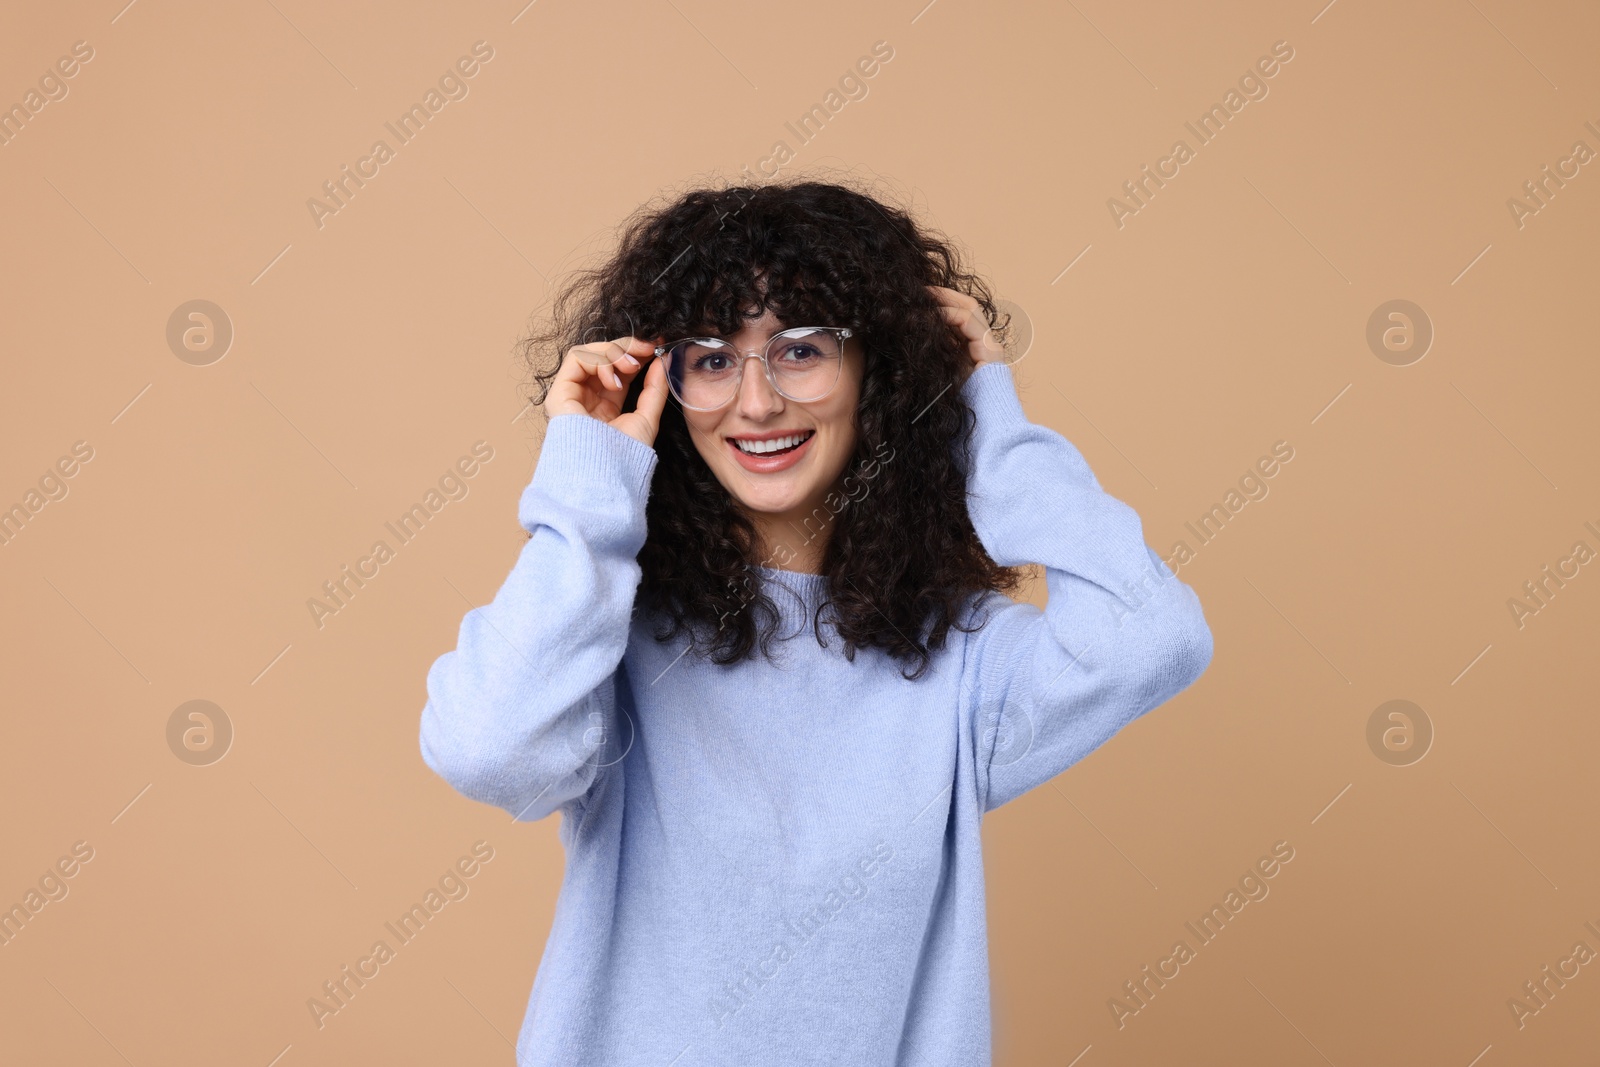 Photo of Happy young woman in stylish light blue sweater and glasses on beige background